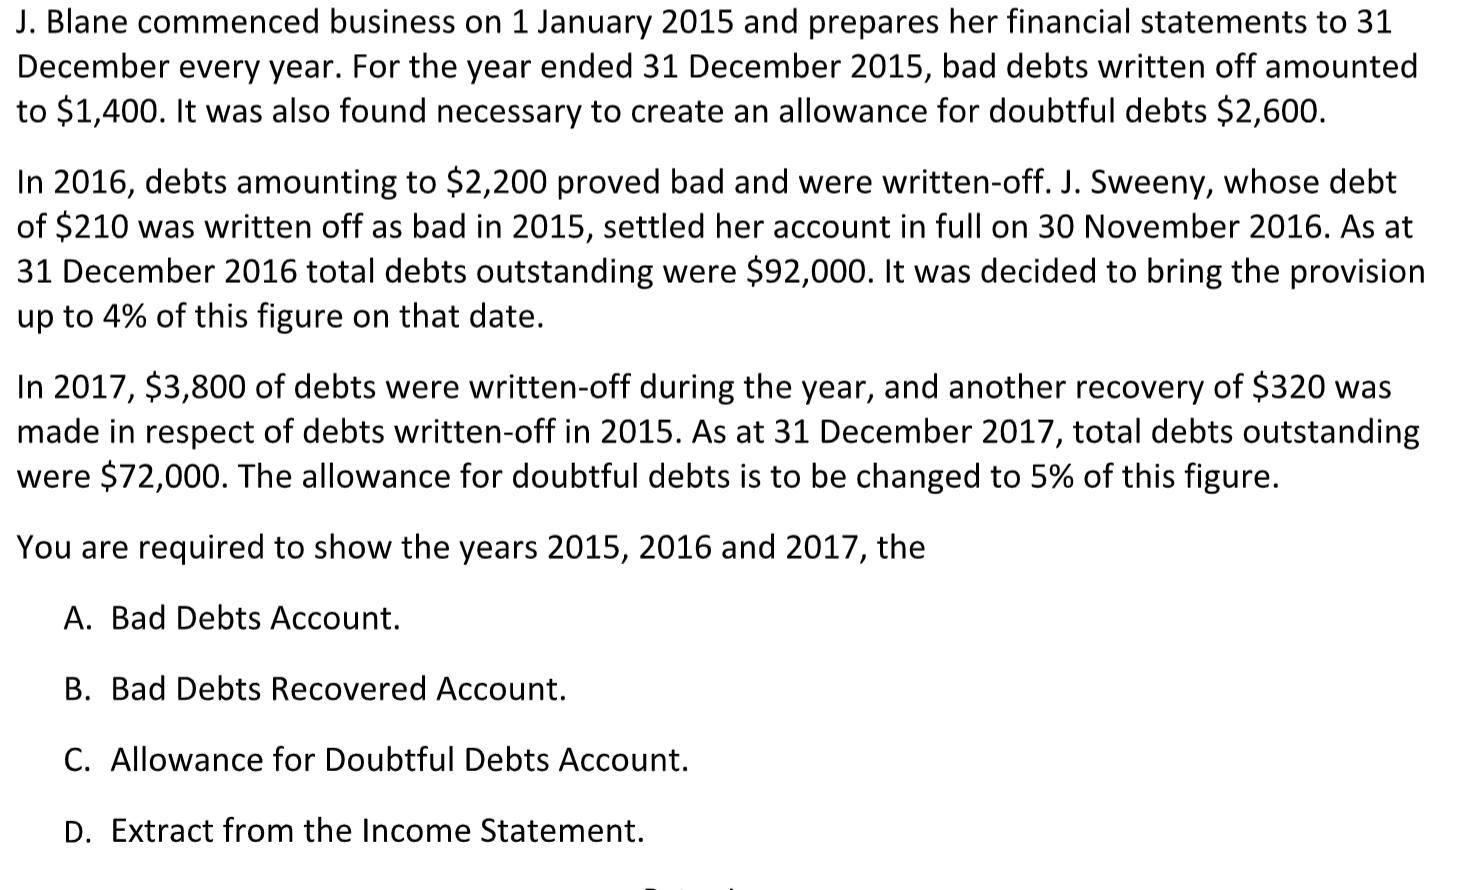 J. Blane commenced business on 1 January 2015 and prepares her financial statements to 31 December every year. For the year e